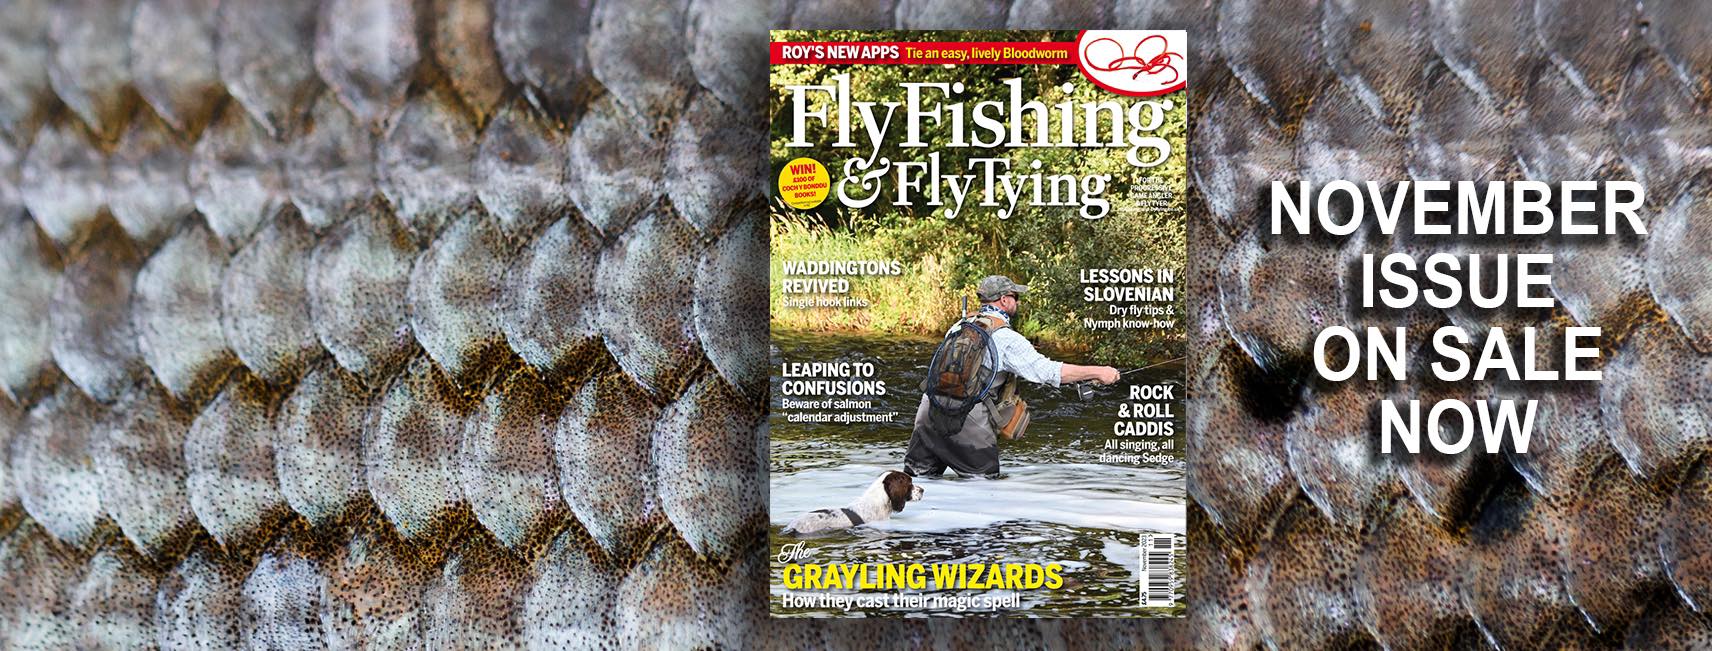 fly fishing and fly tying new issue on grayling background